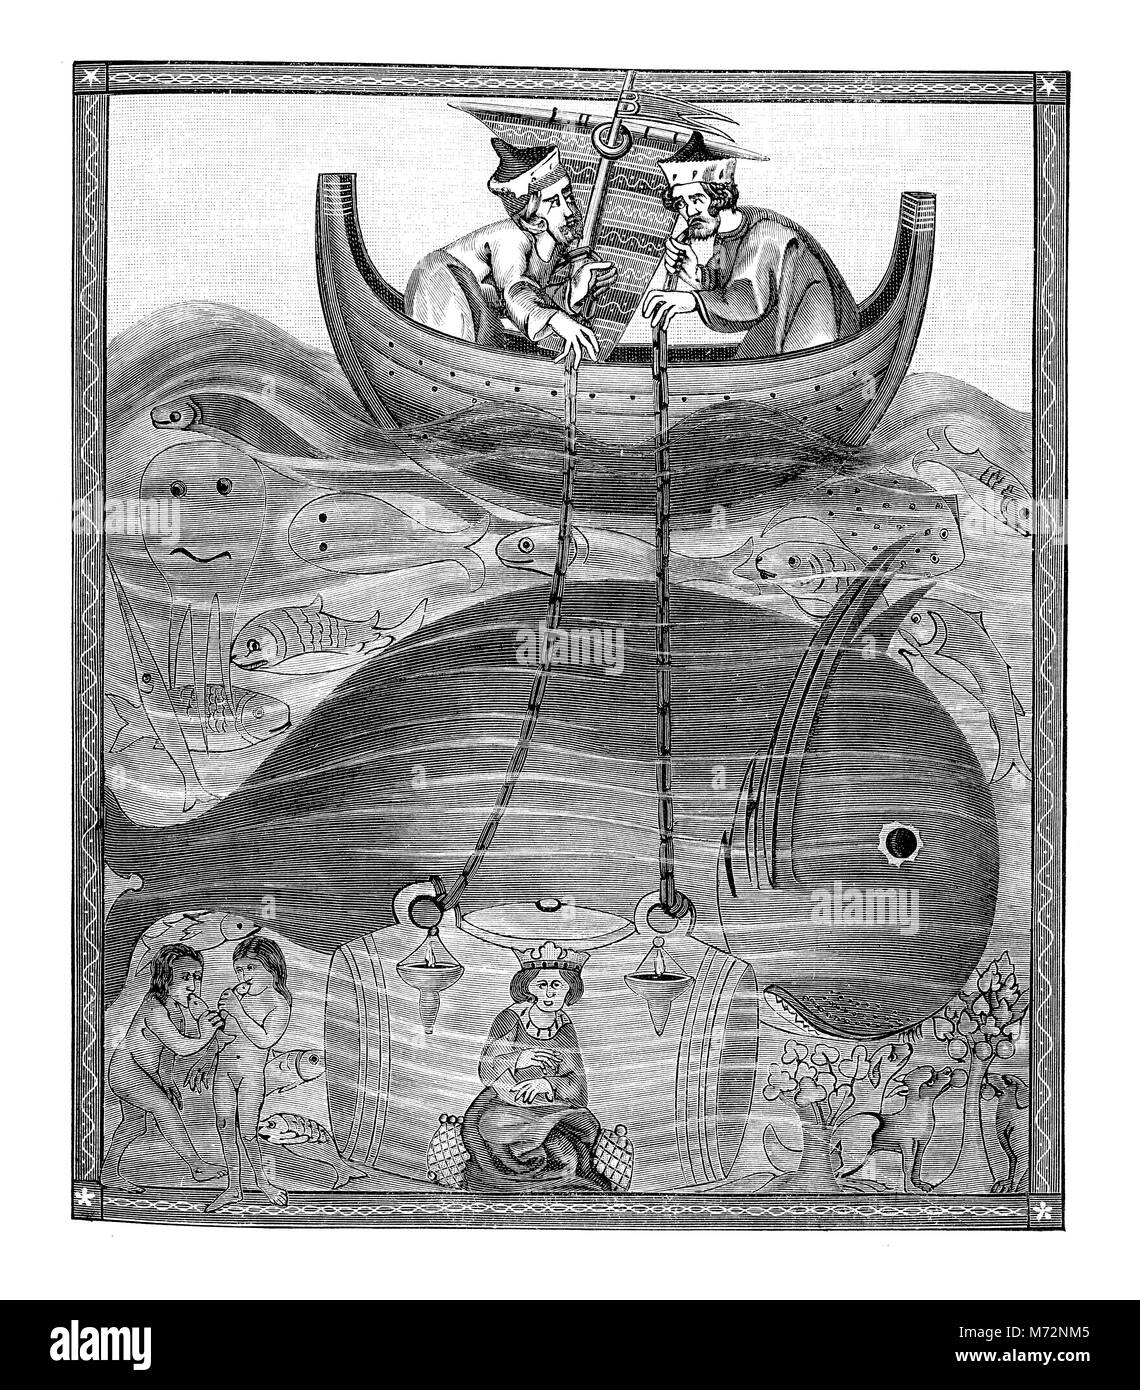 Fantastic medieval representation of sea depth waters, with human and whale underwater, XII century illustration Stock Photo